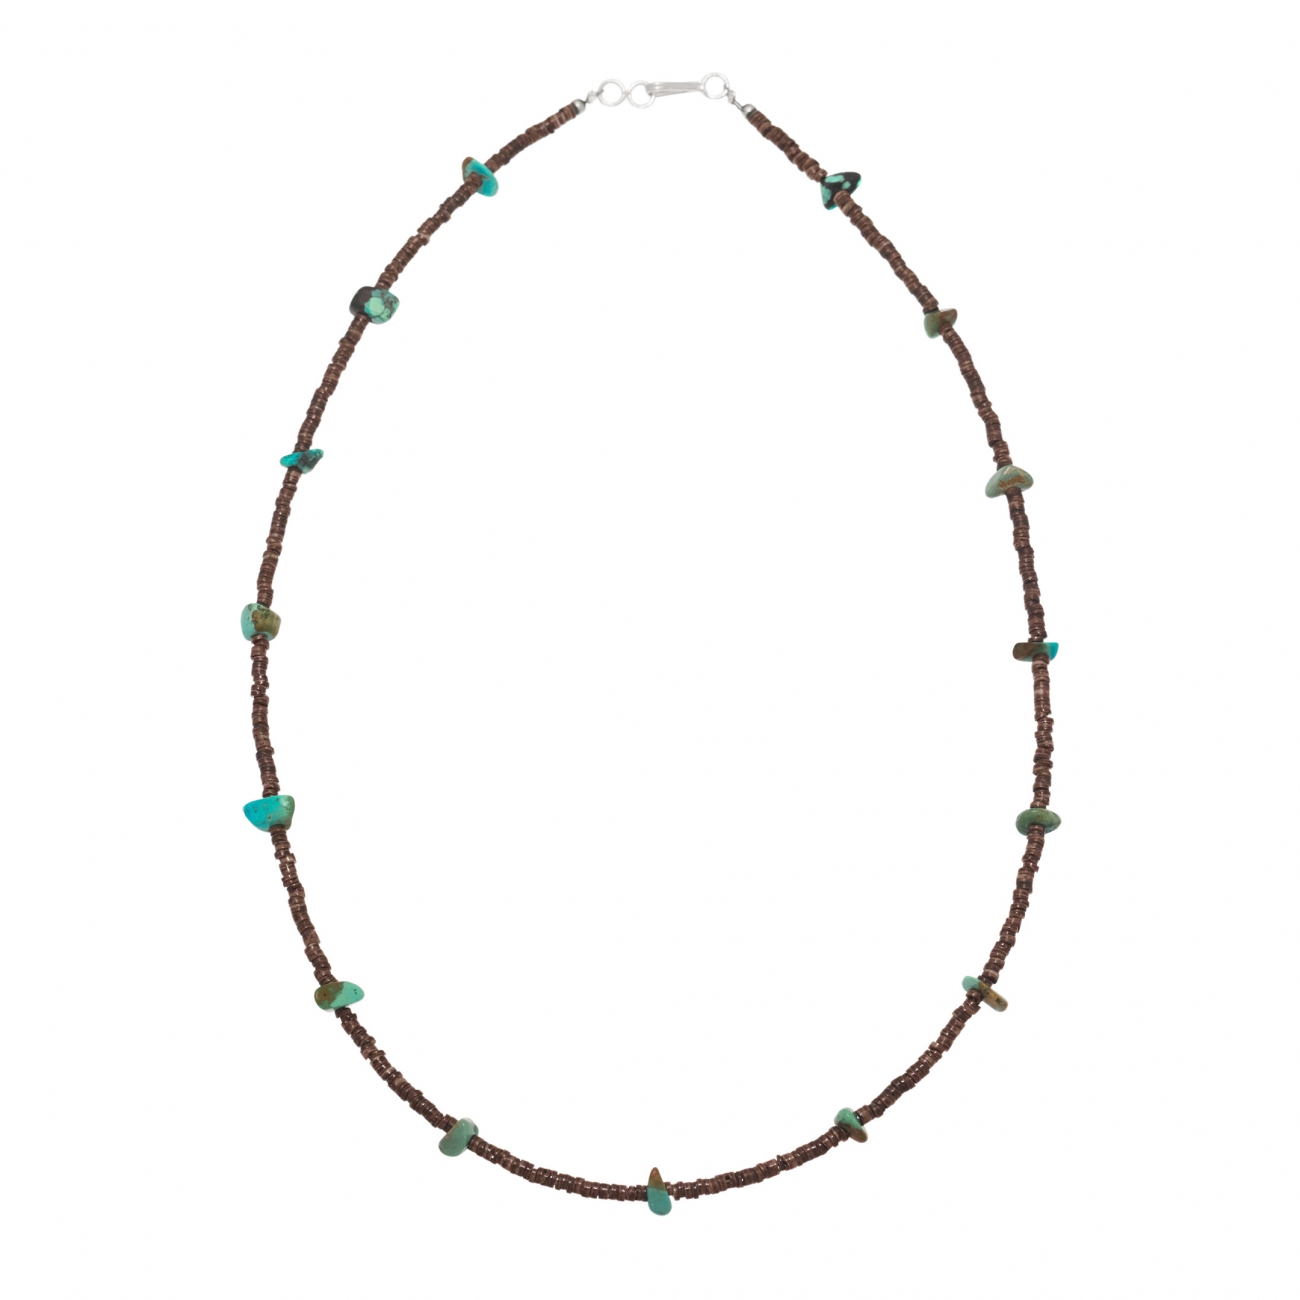 Pueblo necklace COw48 in shell and turquoise - Harpo Paris